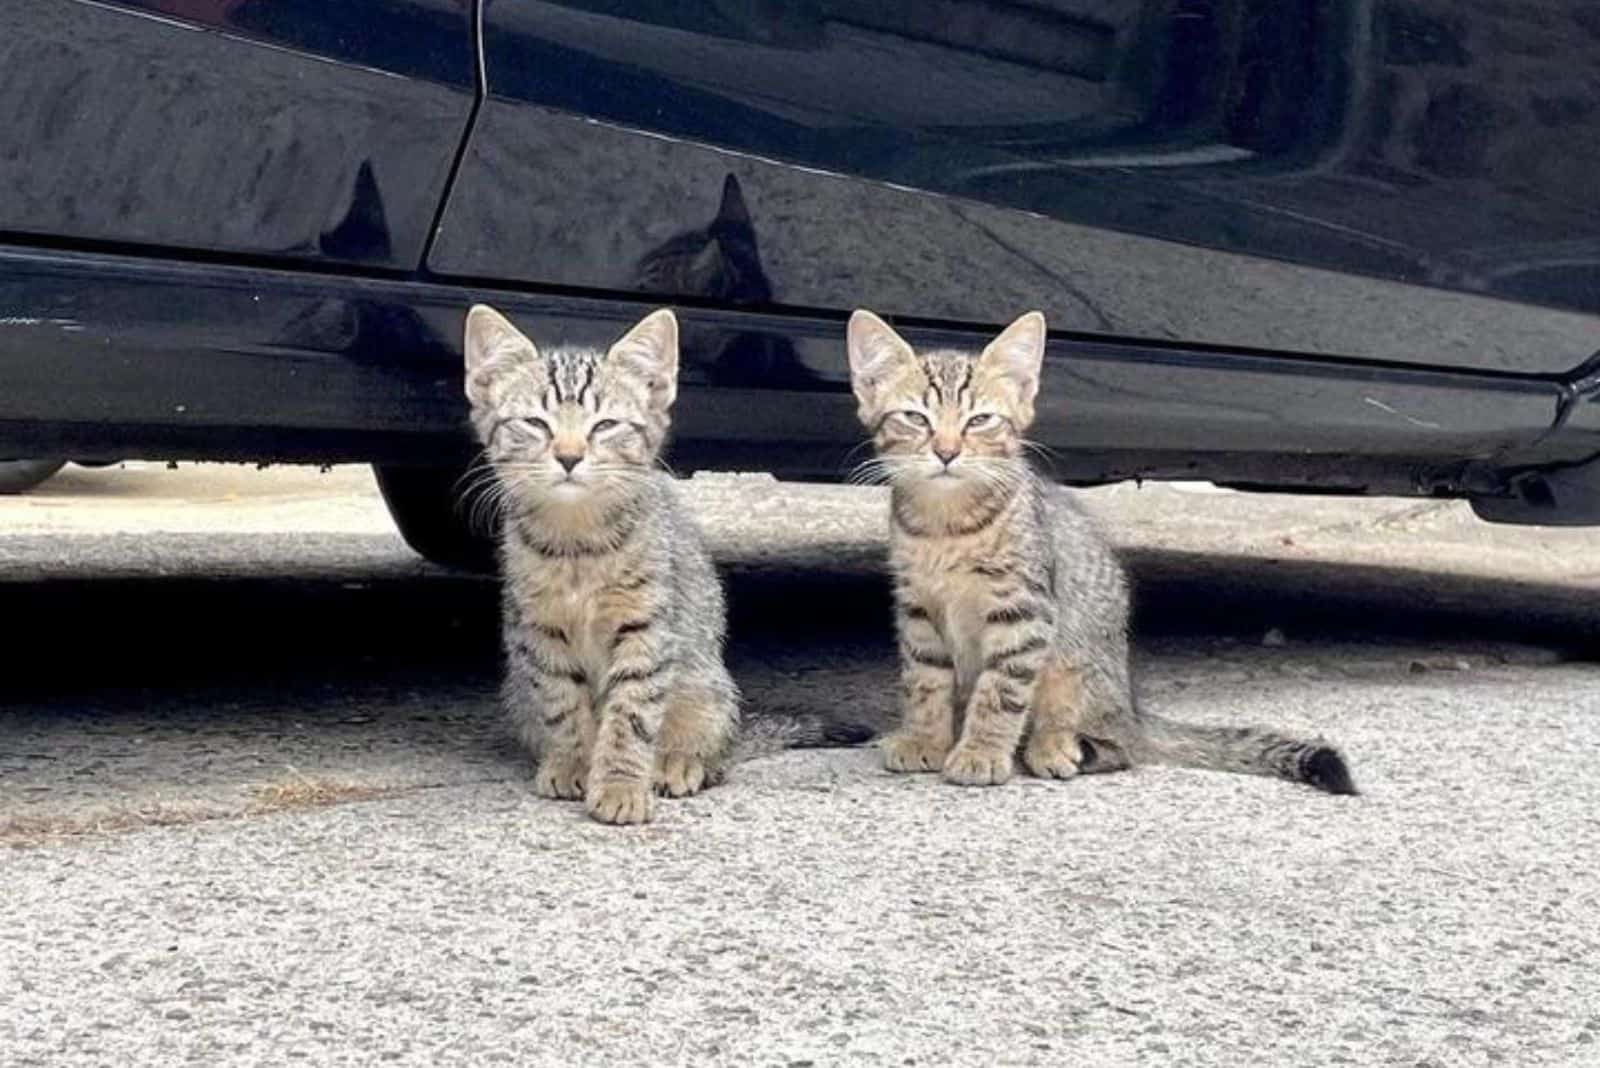 twin kittens are sitting on the street next to the car